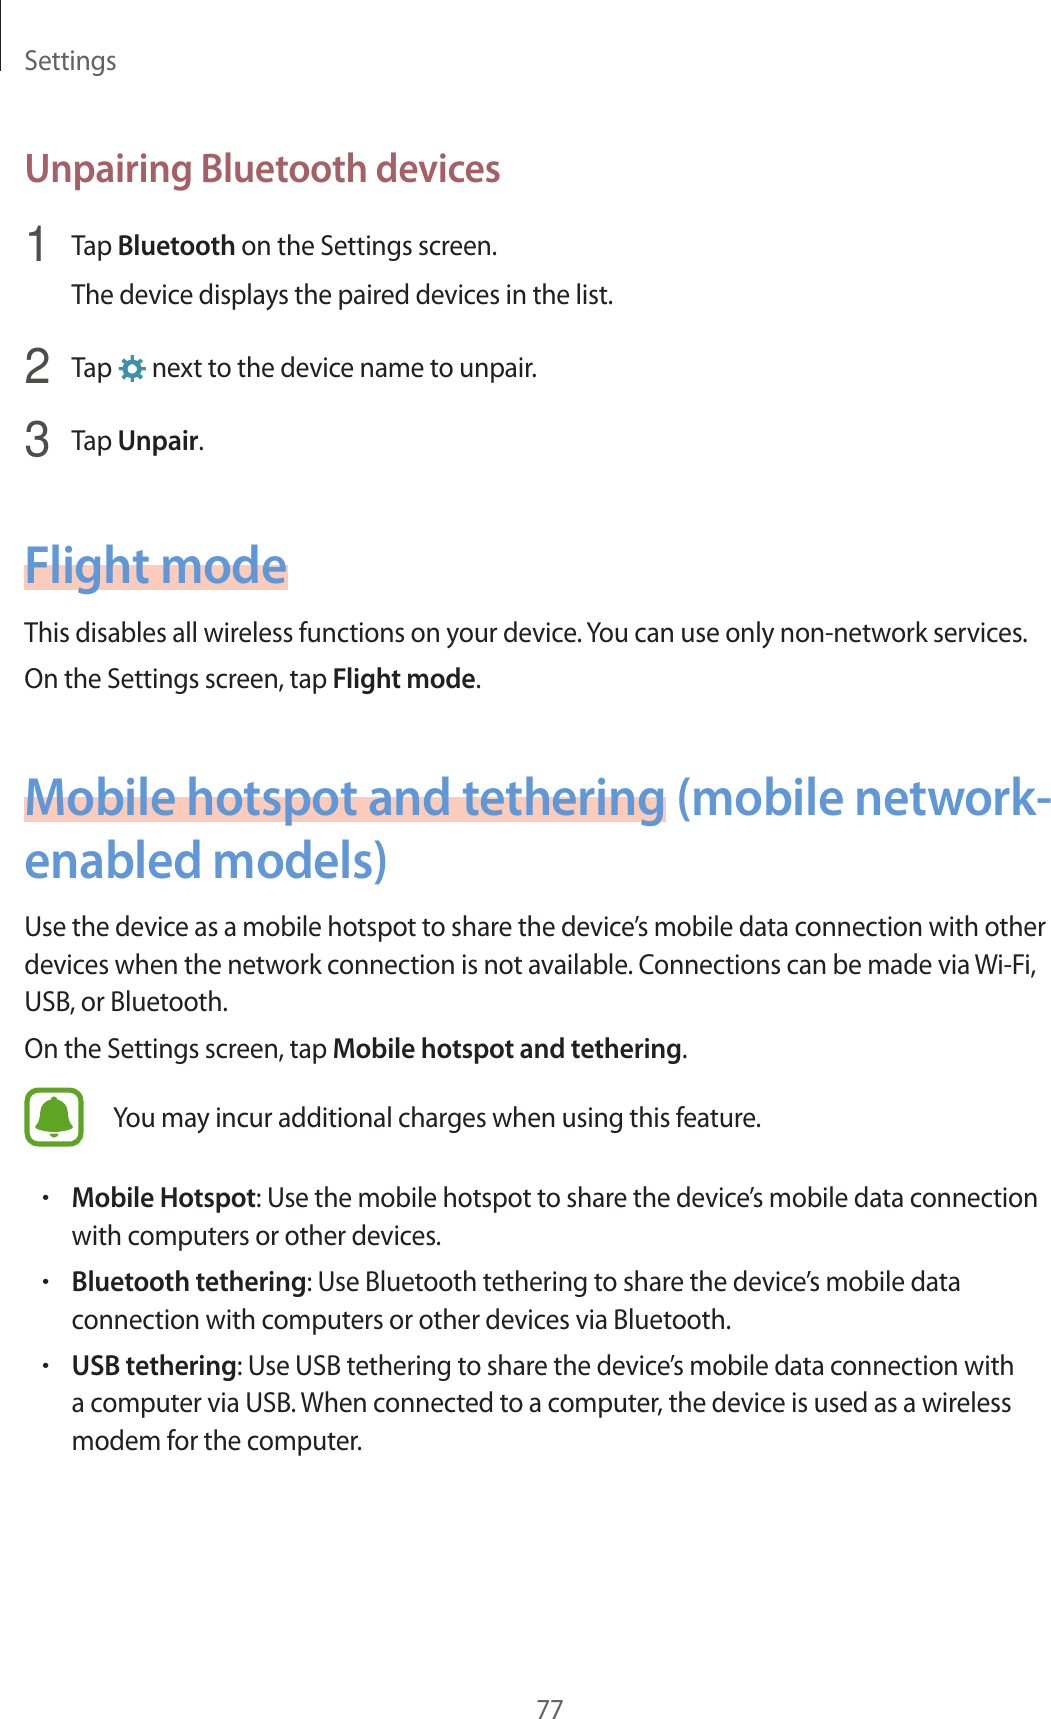 Settings77Unpairing Bluetooth devices1  Tap Bluetooth on the Settings screen.The device displays the paired devices in the list.2  Tap   next to the device name to unpair.3  Tap Unpair.Flight modeThis disables all wireless functions on your device. You can use only non-network services.On the Settings screen, tap Flight mode.Mobile hotspot and tethering (mobile network-enabled models)Use the device as a mobile hotspot to share the device’s mobile data connection with other devices when the network connection is not available. Connections can be made via Wi-Fi, USB, or Bluetooth.On the Settings screen, tap Mobile hotspot and tethering.You may incur additional charges when using this feature.•Mobile Hotspot: Use the mobile hotspot to share the device’s mobile data connection with computers or other devices.•Bluetooth tethering: Use Bluetooth tethering to share the device’s mobile data connection with computers or other devices via Bluetooth.•USB tethering: Use USB tethering to share the device’s mobile data connection with a computer via USB. When connected to a computer, the device is used as a wireless modem for the computer.